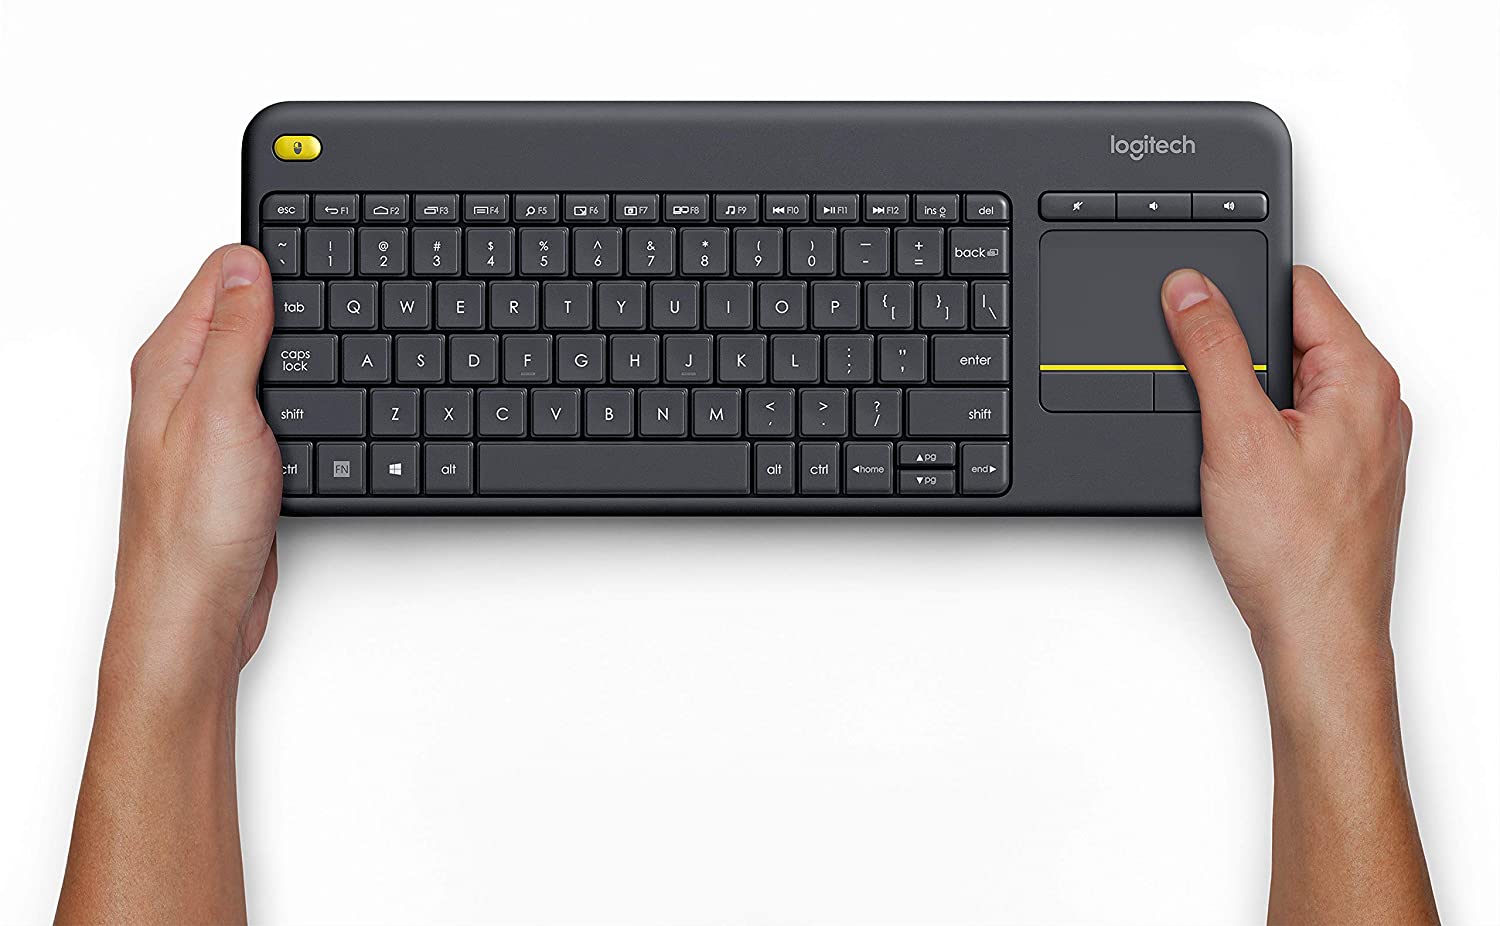 Logitech K400 Wireless Keyboard with Touchpad for Home Theatre PC Connected to TV, Customizable Multi-Media Keys, Windows, Android, Laptop- Black – Pam Infotech